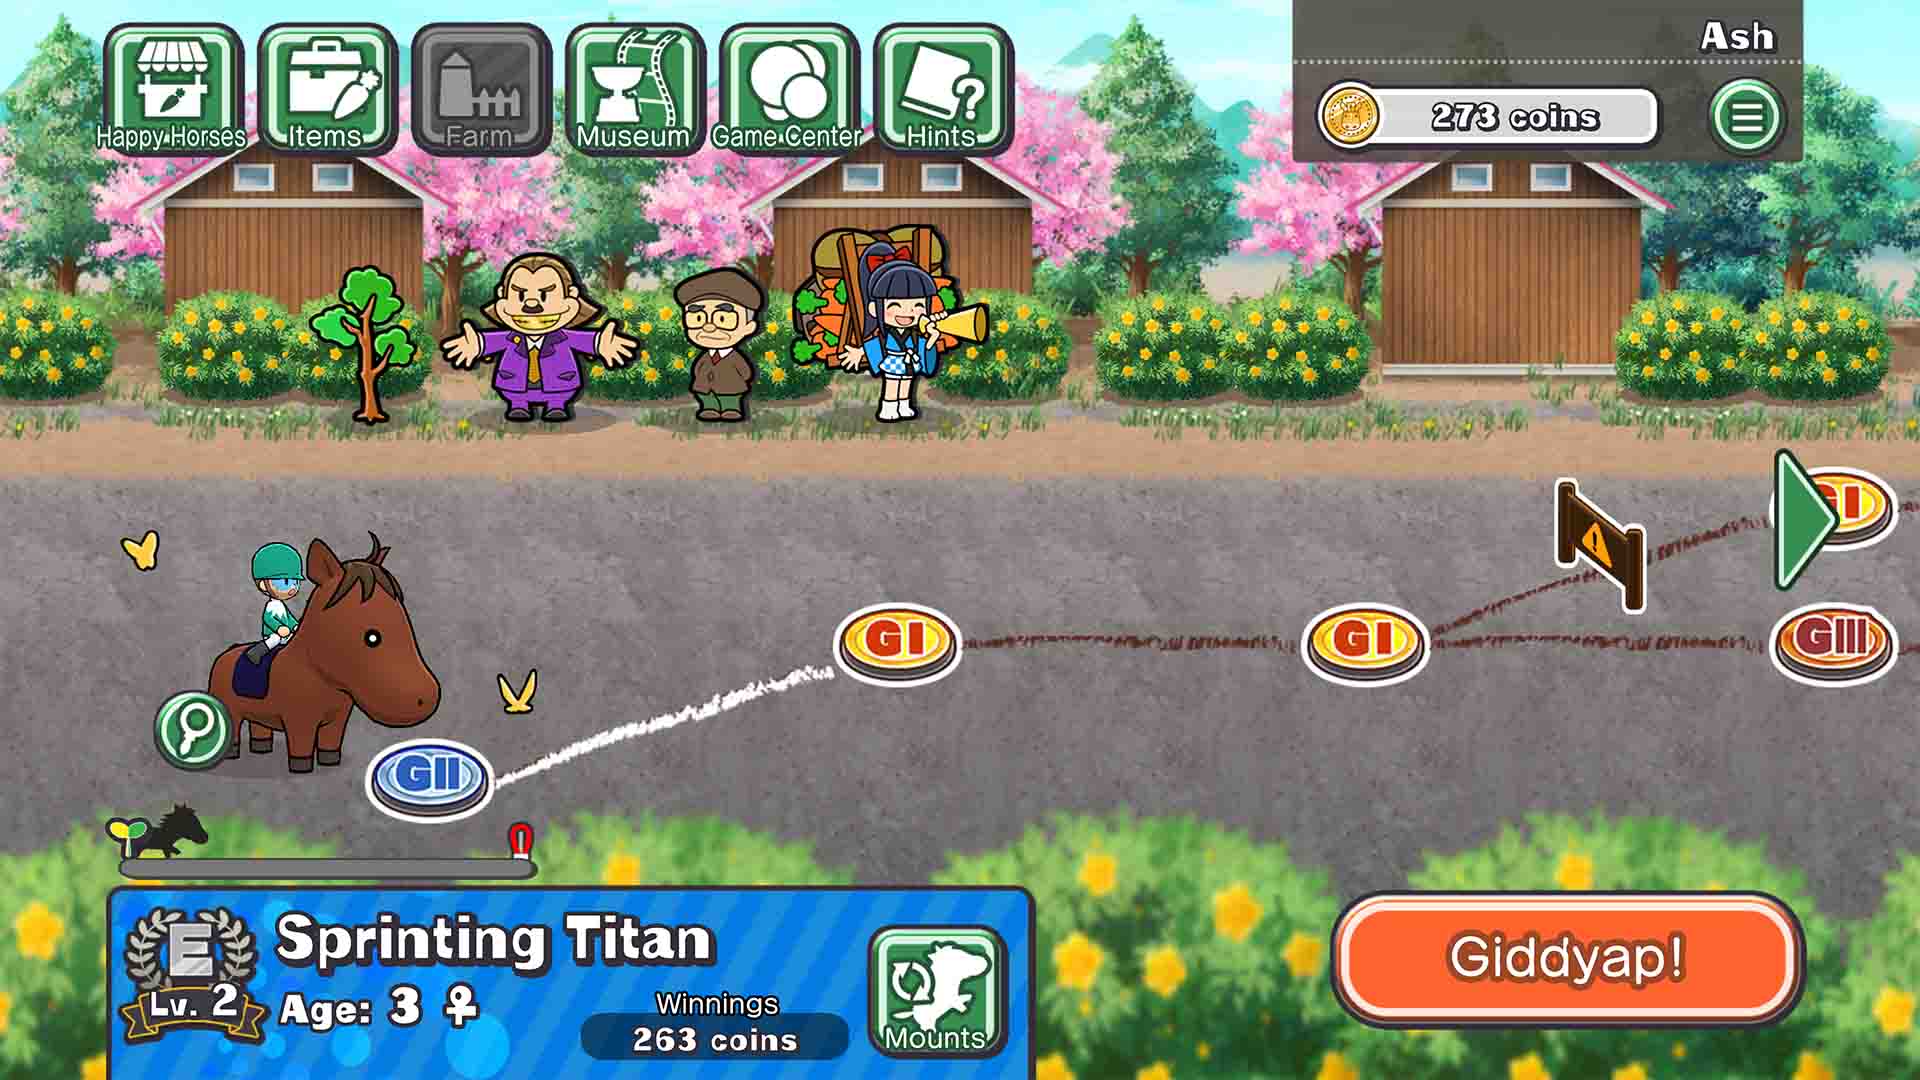 Pocket Card Jockey: Ride On, a Remake of the Nintendo 3DS Classic, Is Out Now on Apple Arcade Alongside Some Big Updates